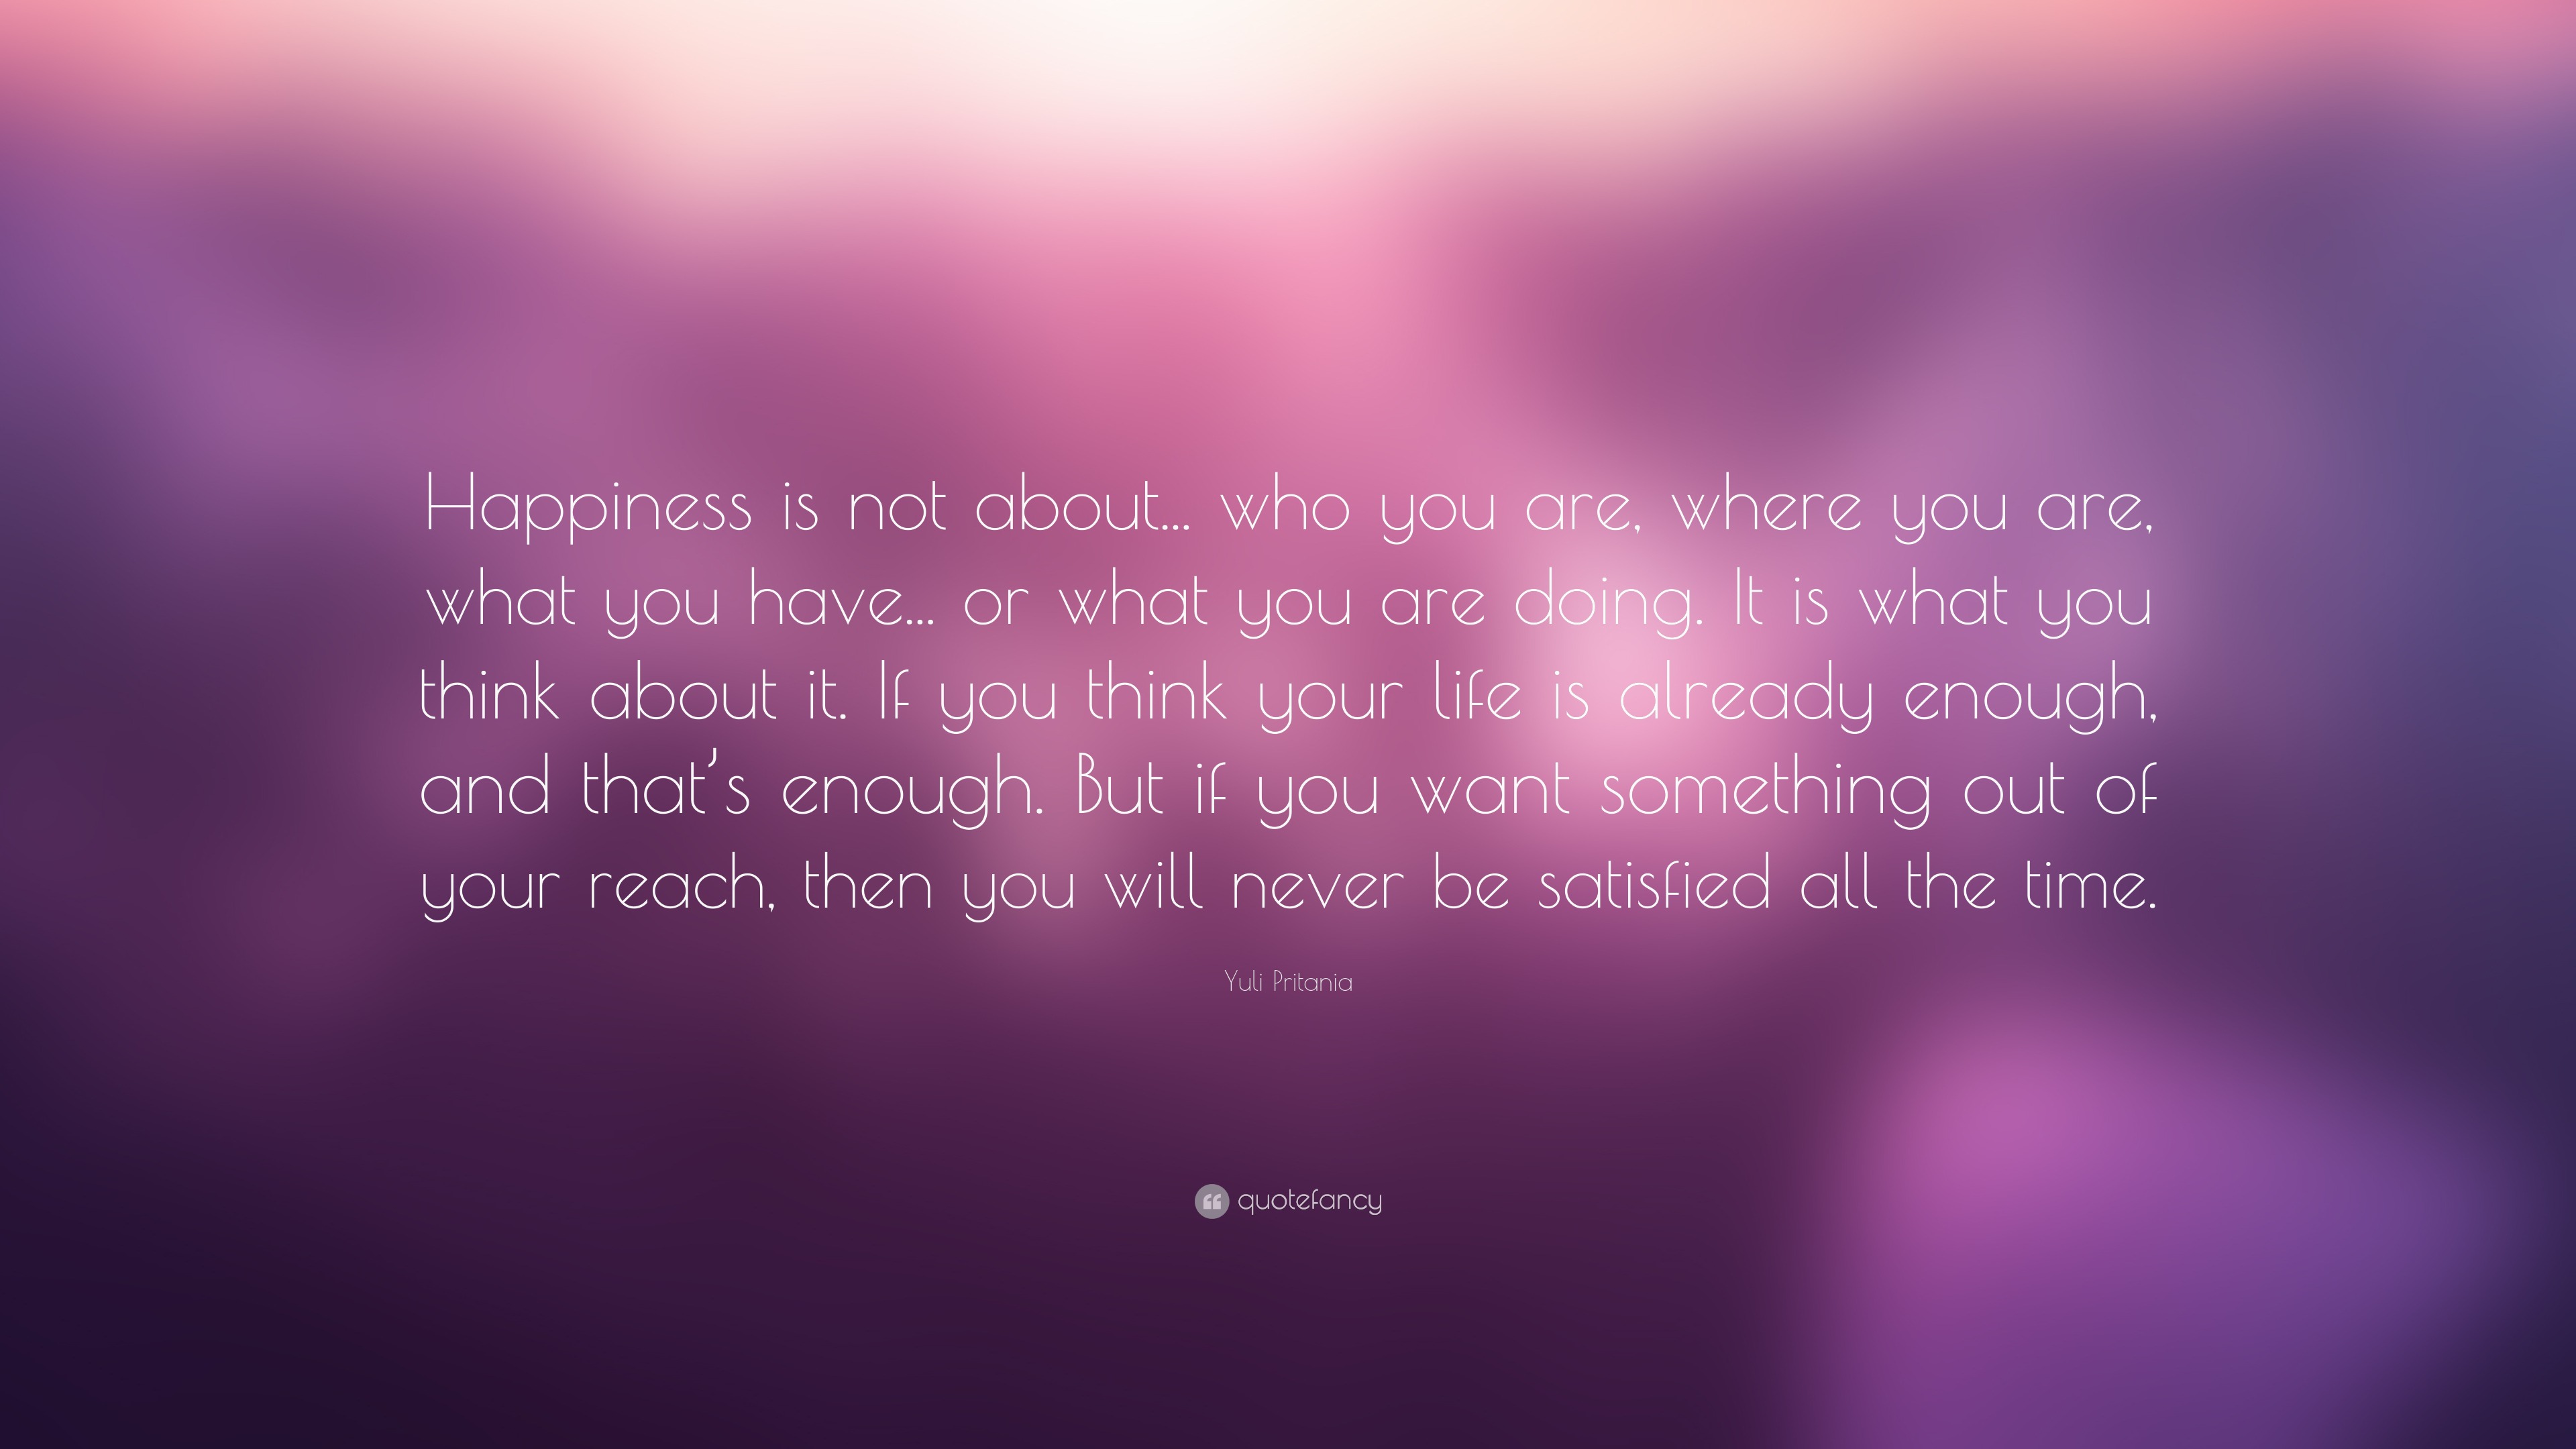 Yuli Pritania Quote: “Happiness is not about... who you are, where you ...